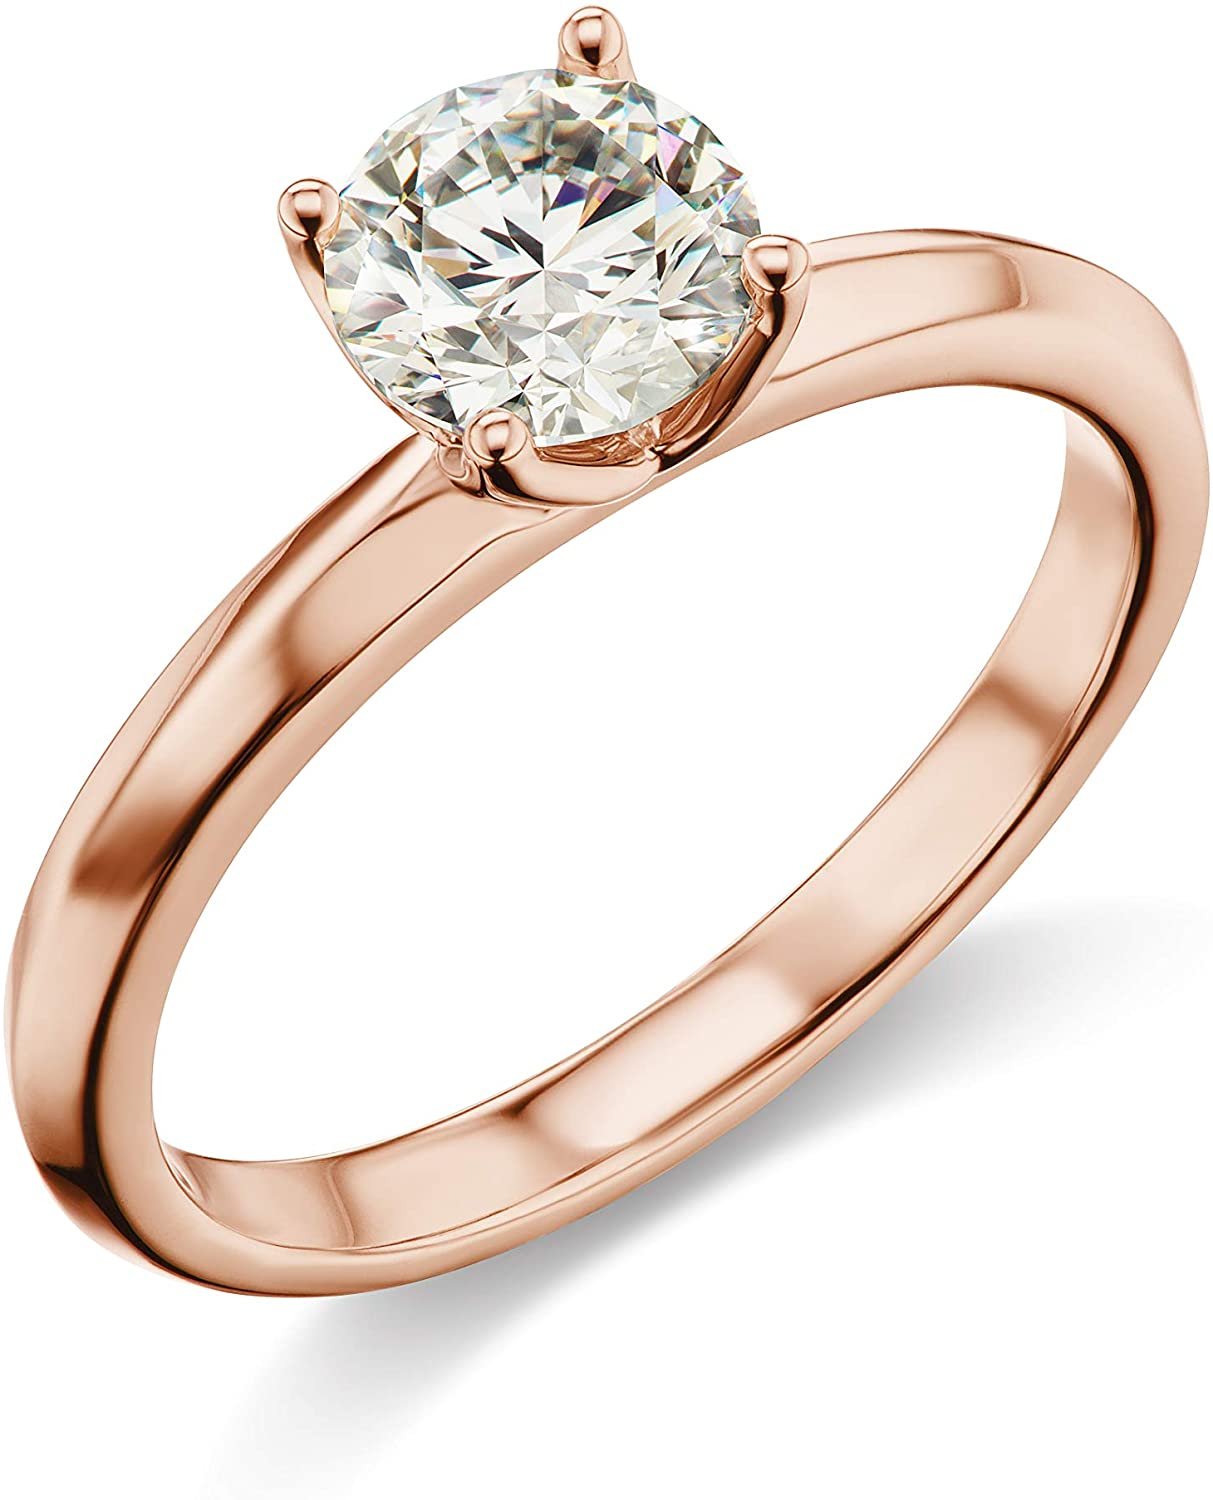 IGI Certified 1-1/2 Carat Round Brilliant-Cut Lab Created Diamond 14K Gold Classic 4-Prong Solitaire Engagement Ring (I-J Color, VS1-VS2 Clarity) - 14K Rose Gold, Size 6